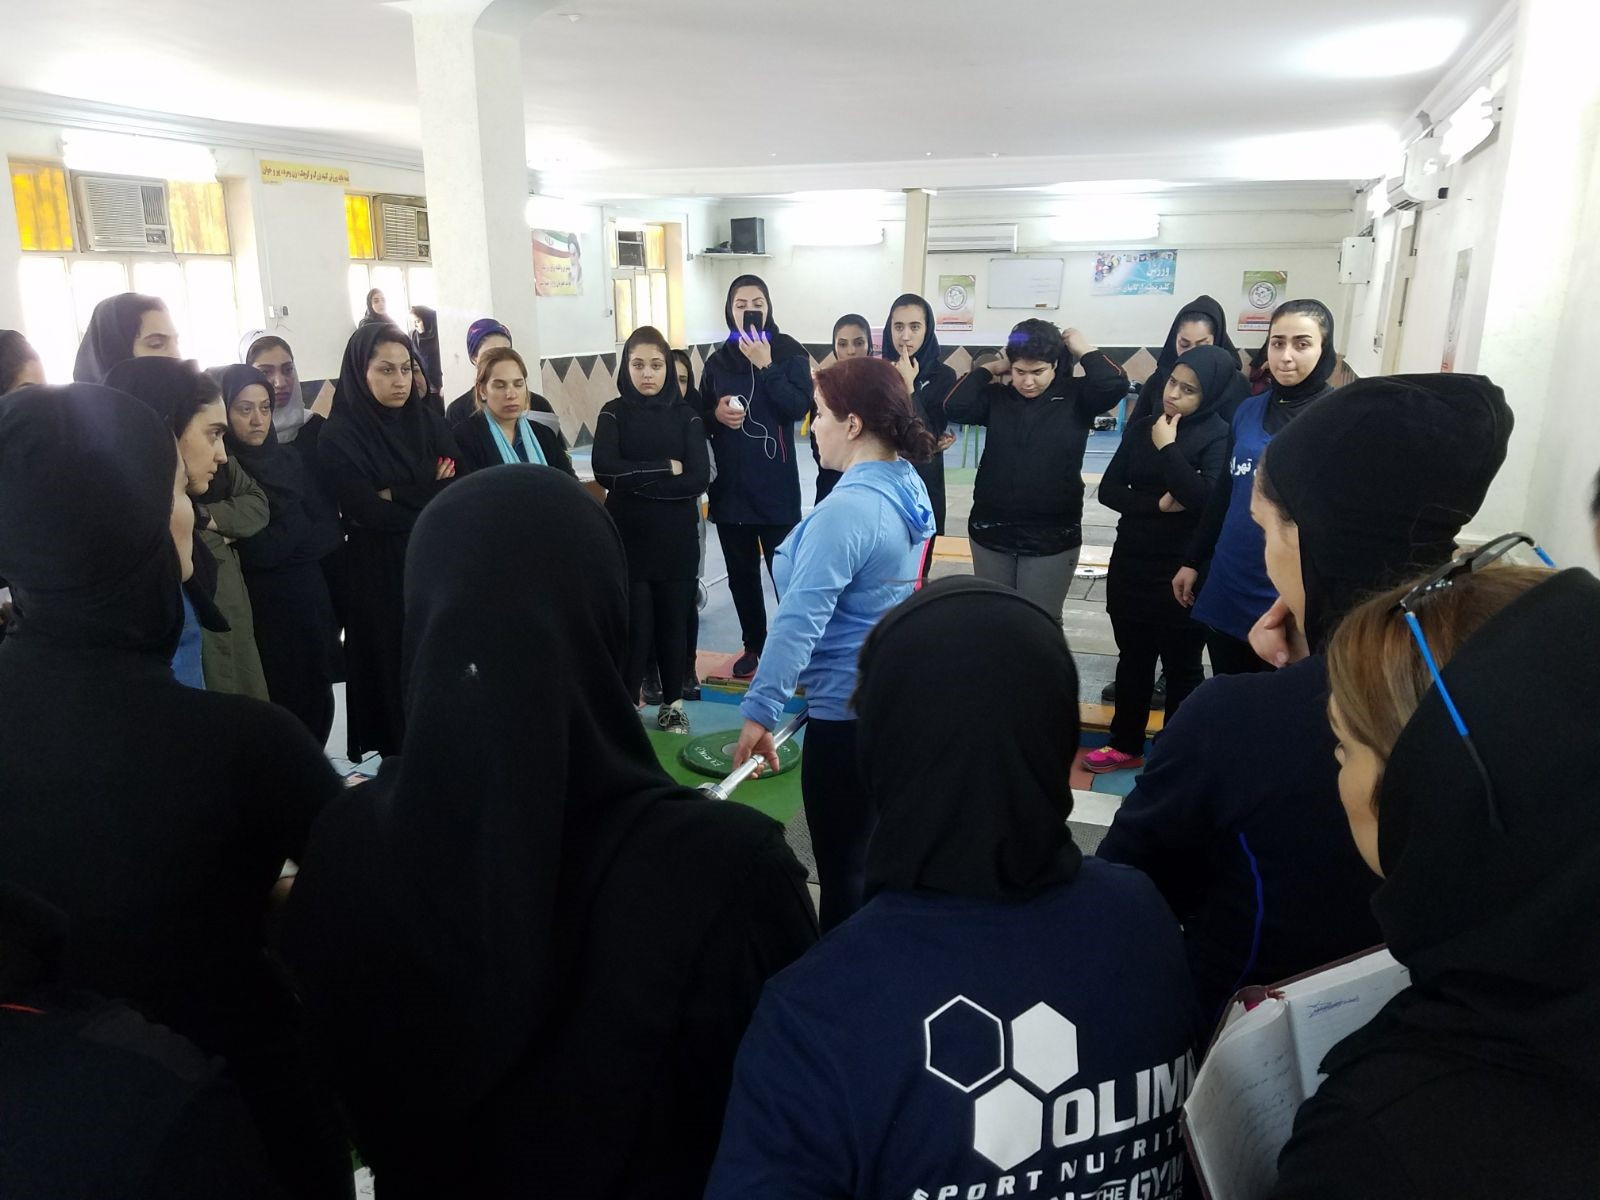 The IWF visited a training camp for female weightlifters in Iran ©IWF